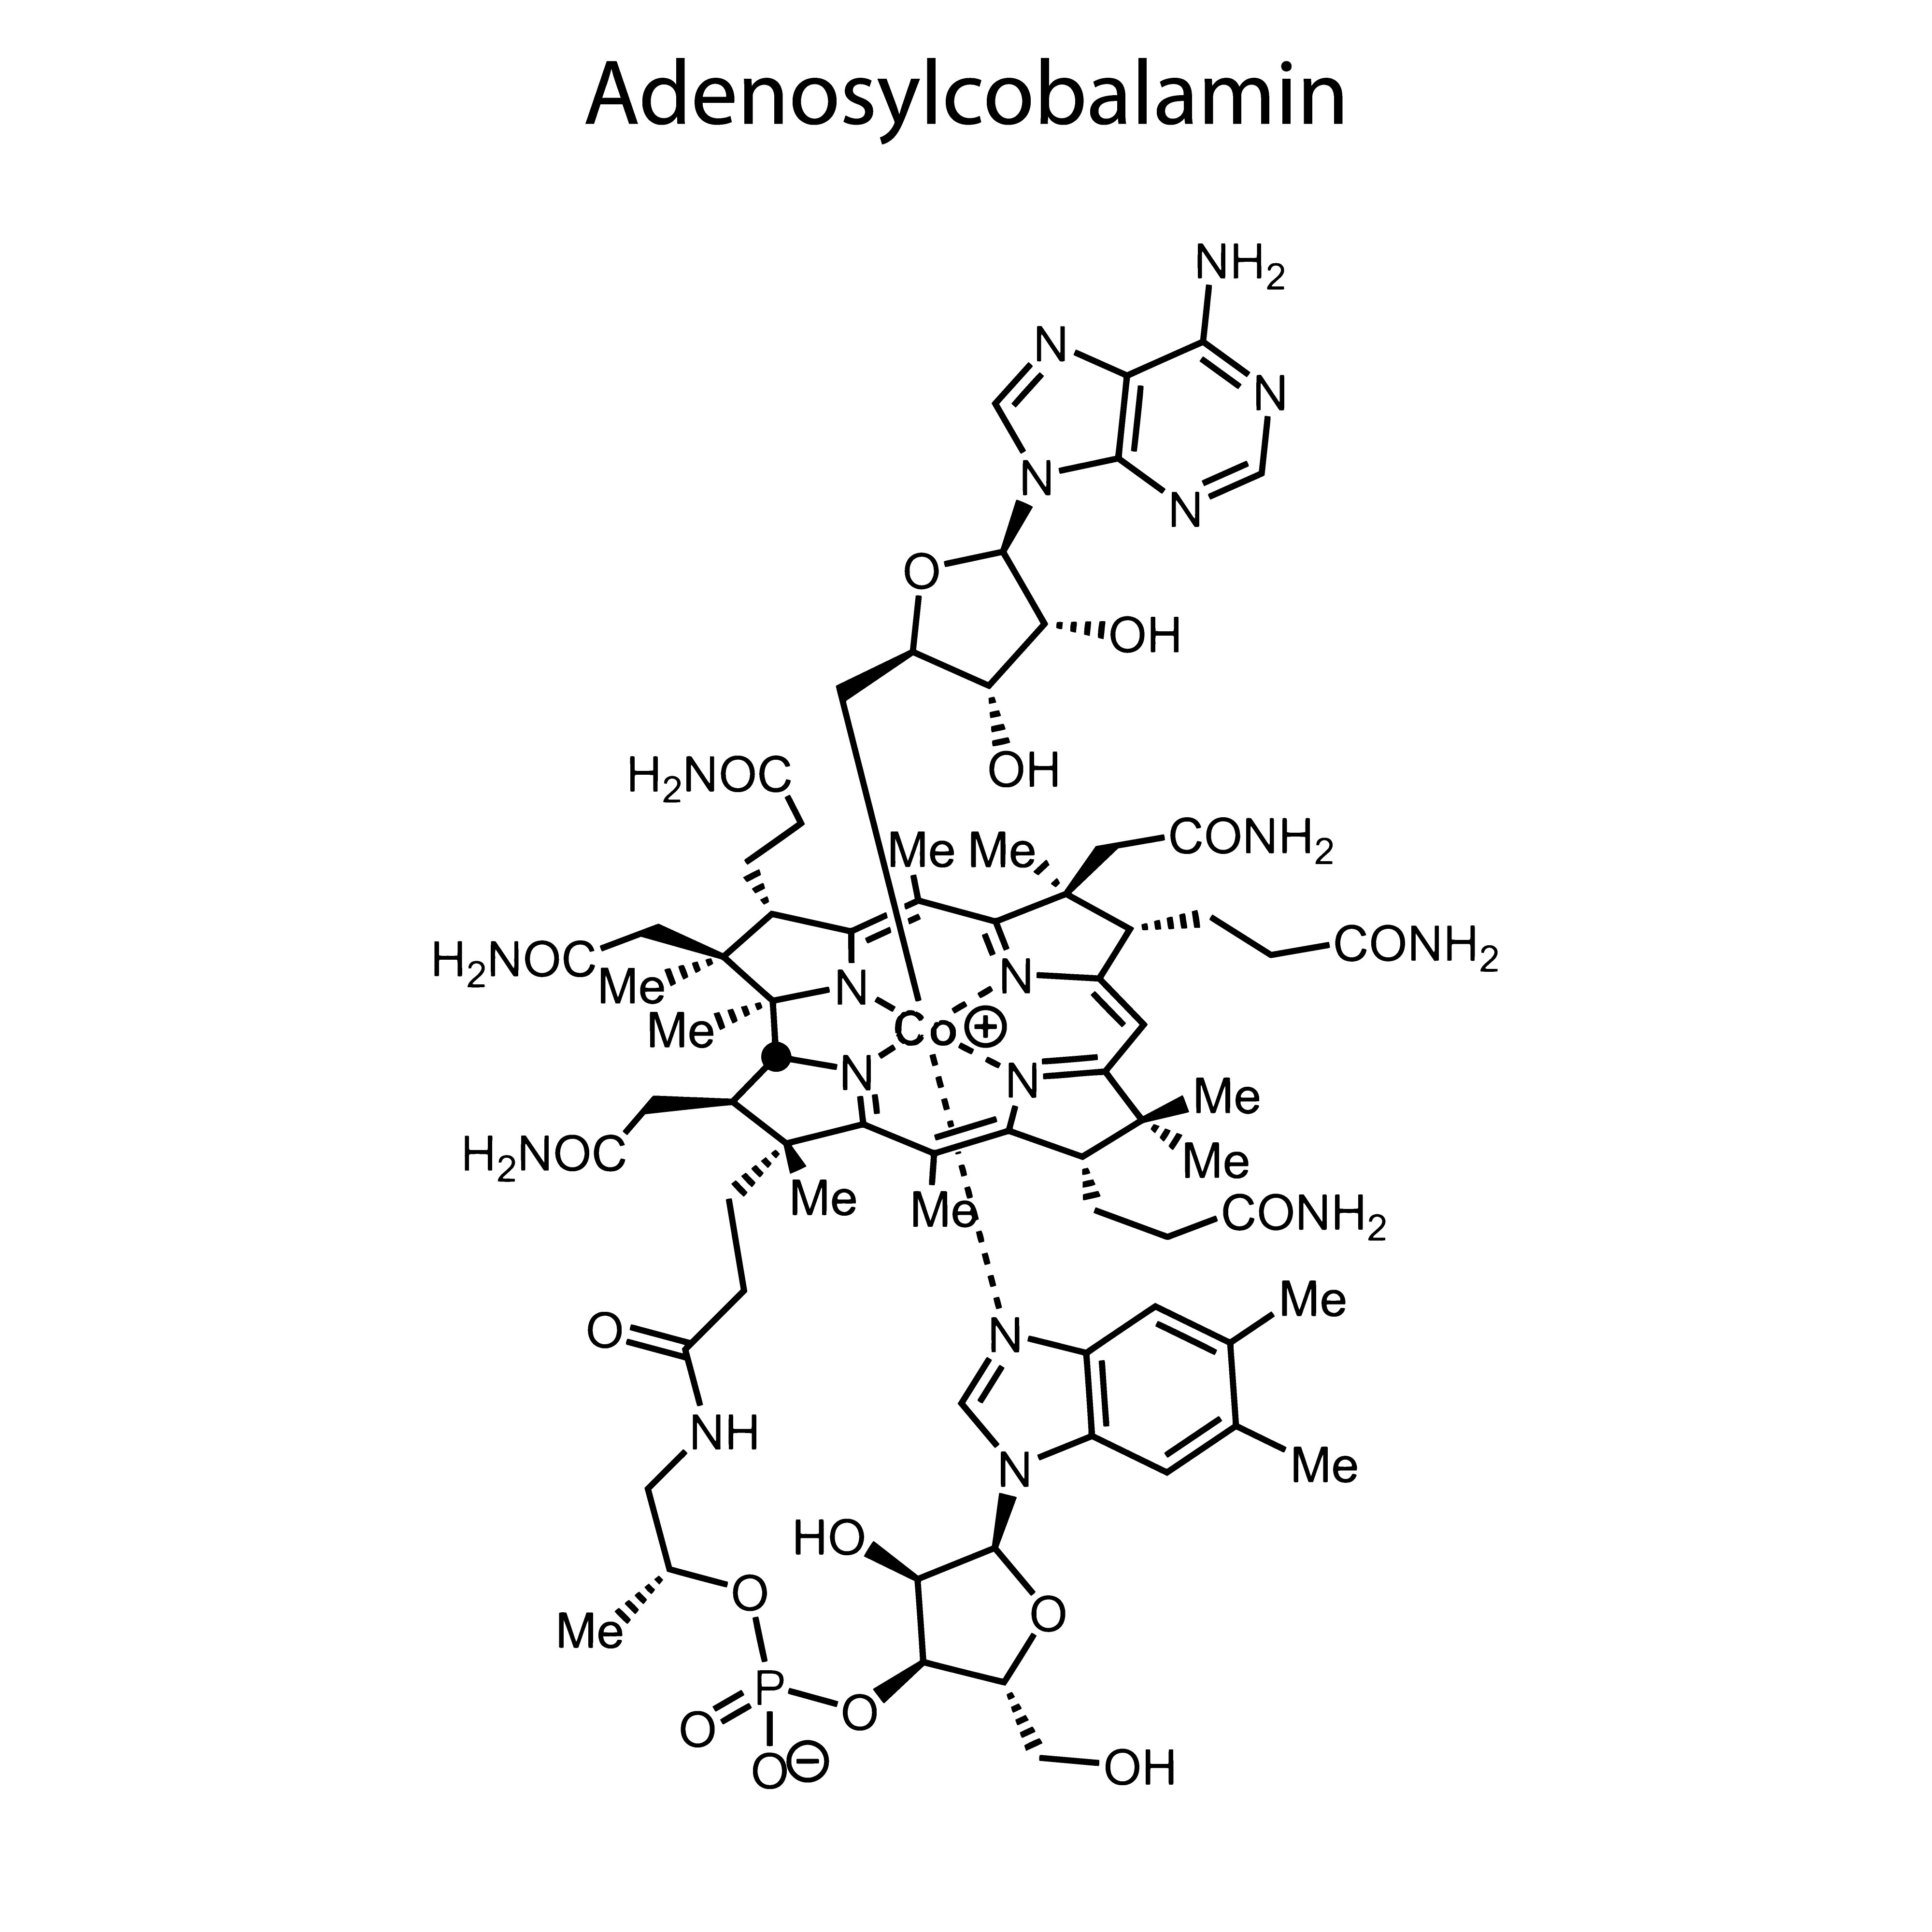 Adenosylcobalamin is the most energy-effective form of Vitamin B12. Your organism need the least energy to convert it to active form of Vitamin B12.